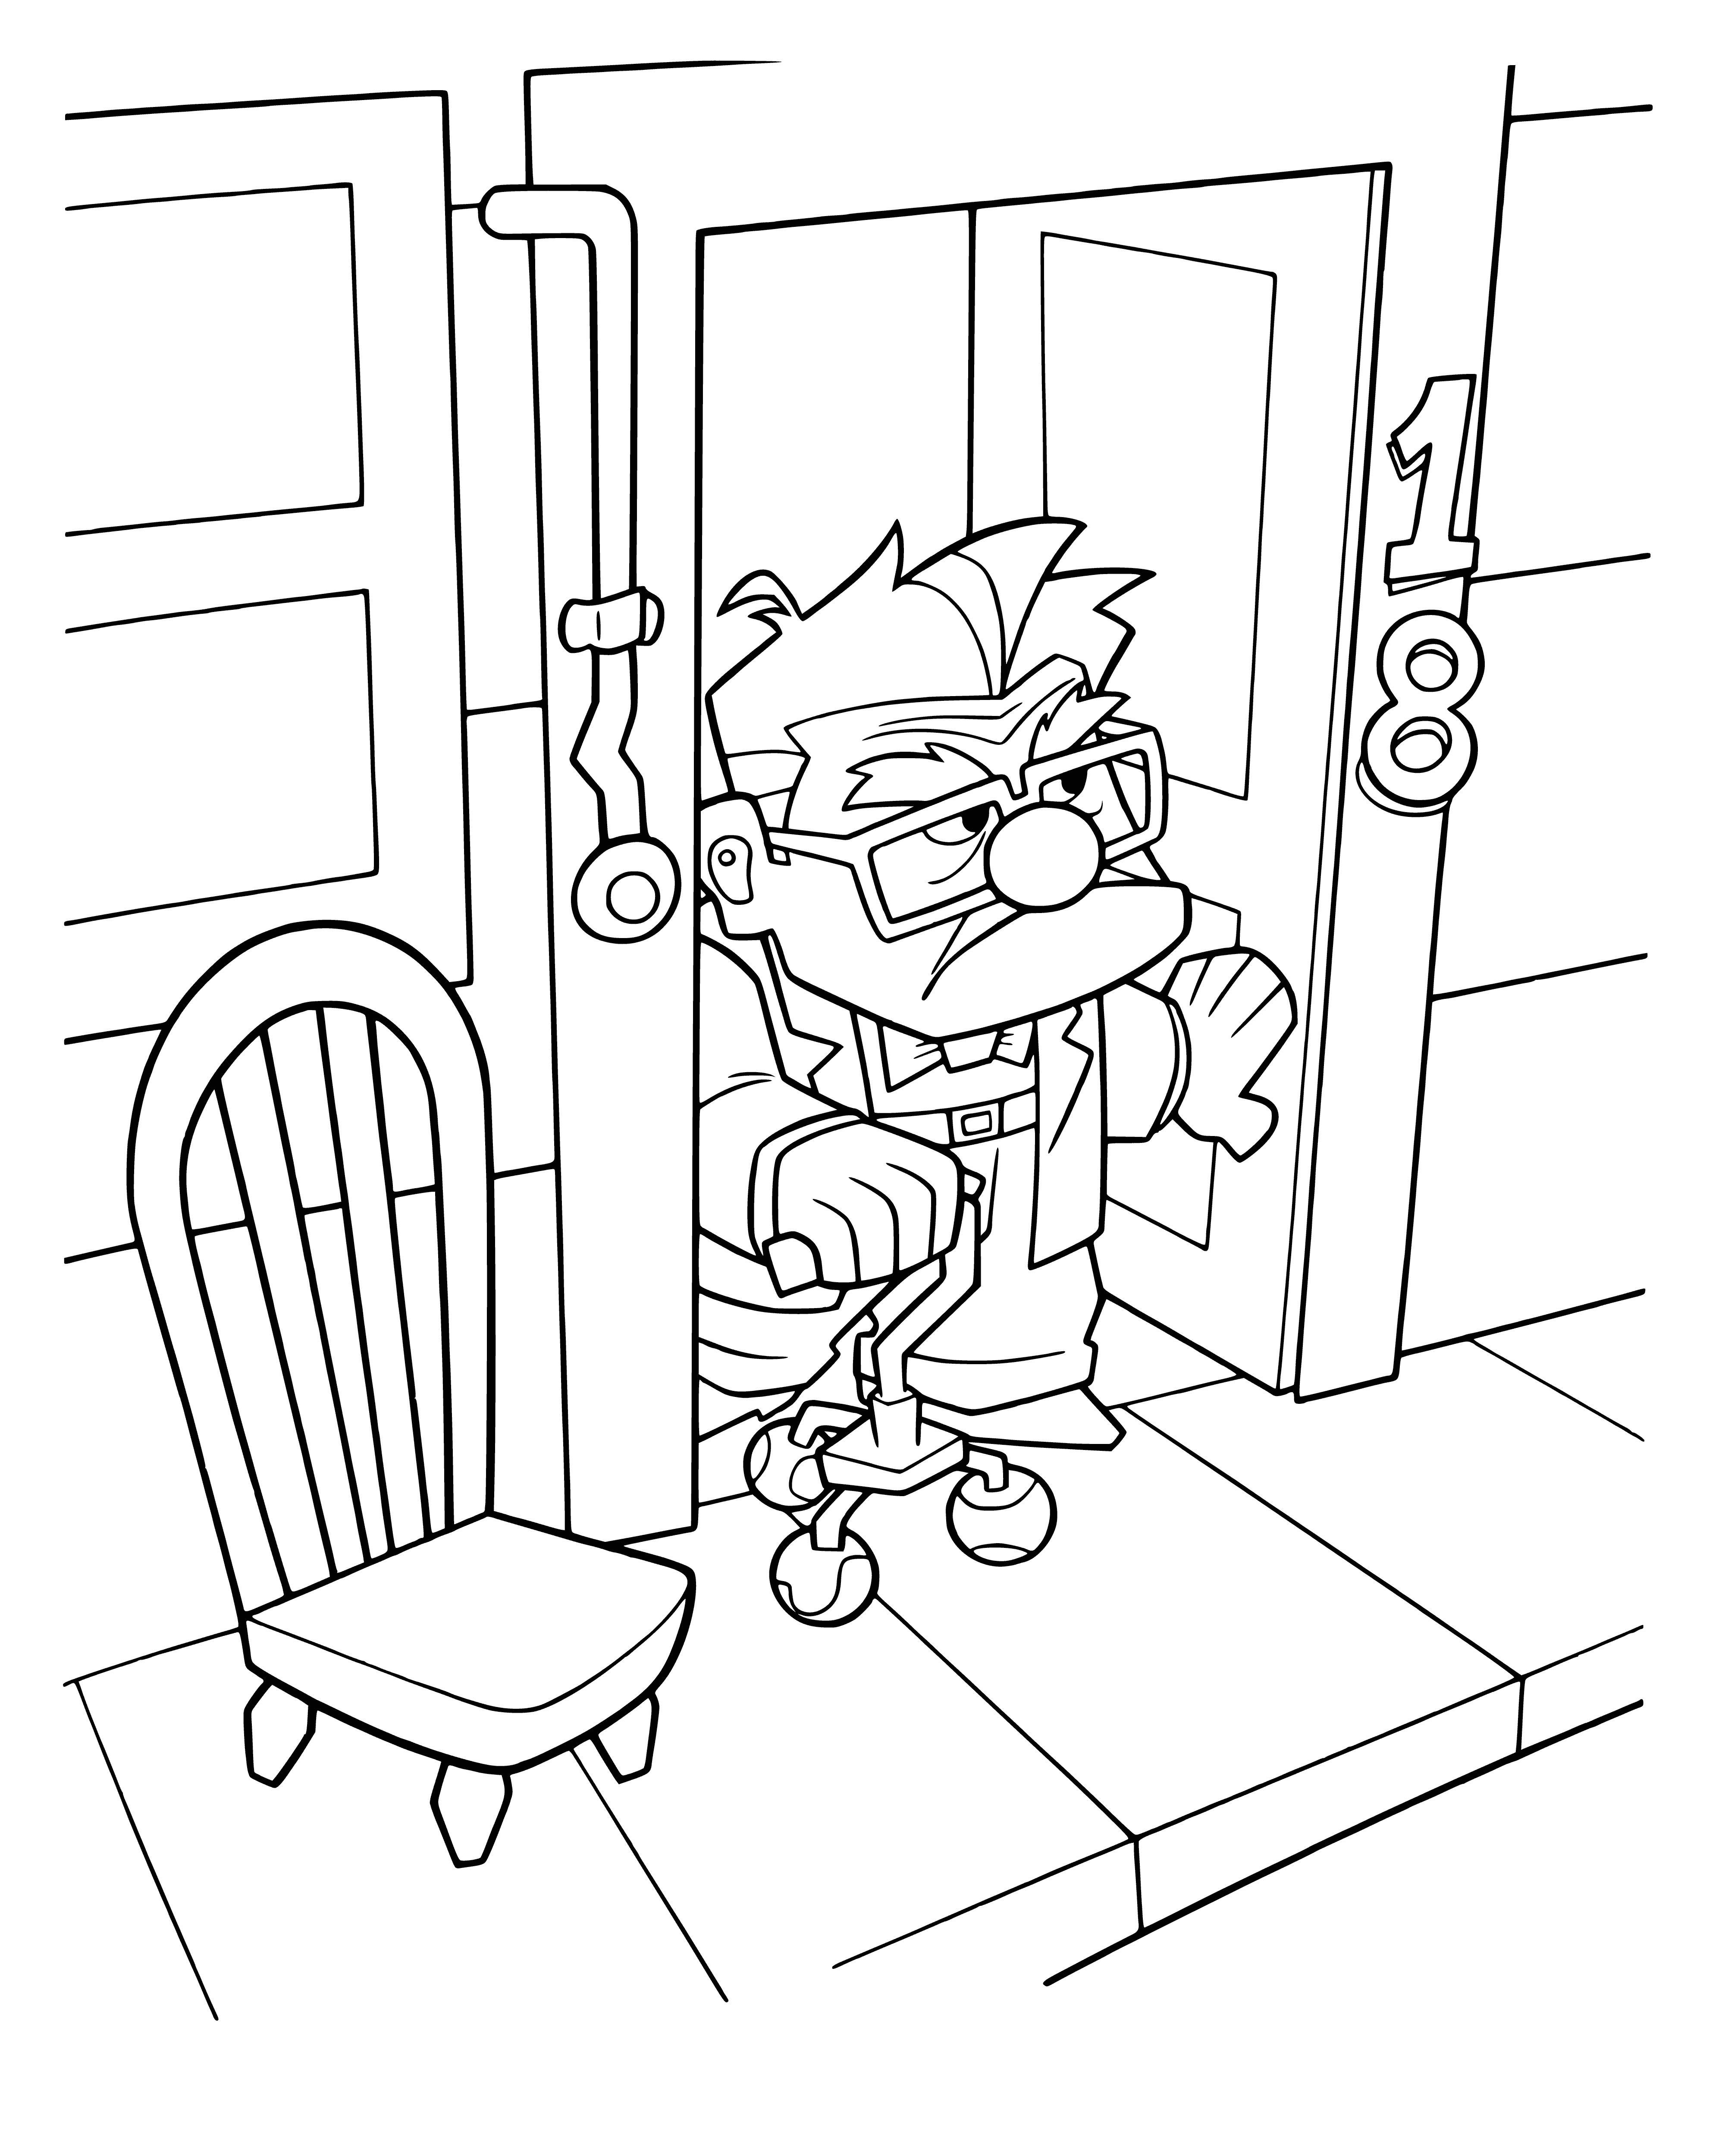 Who else is there? coloring page